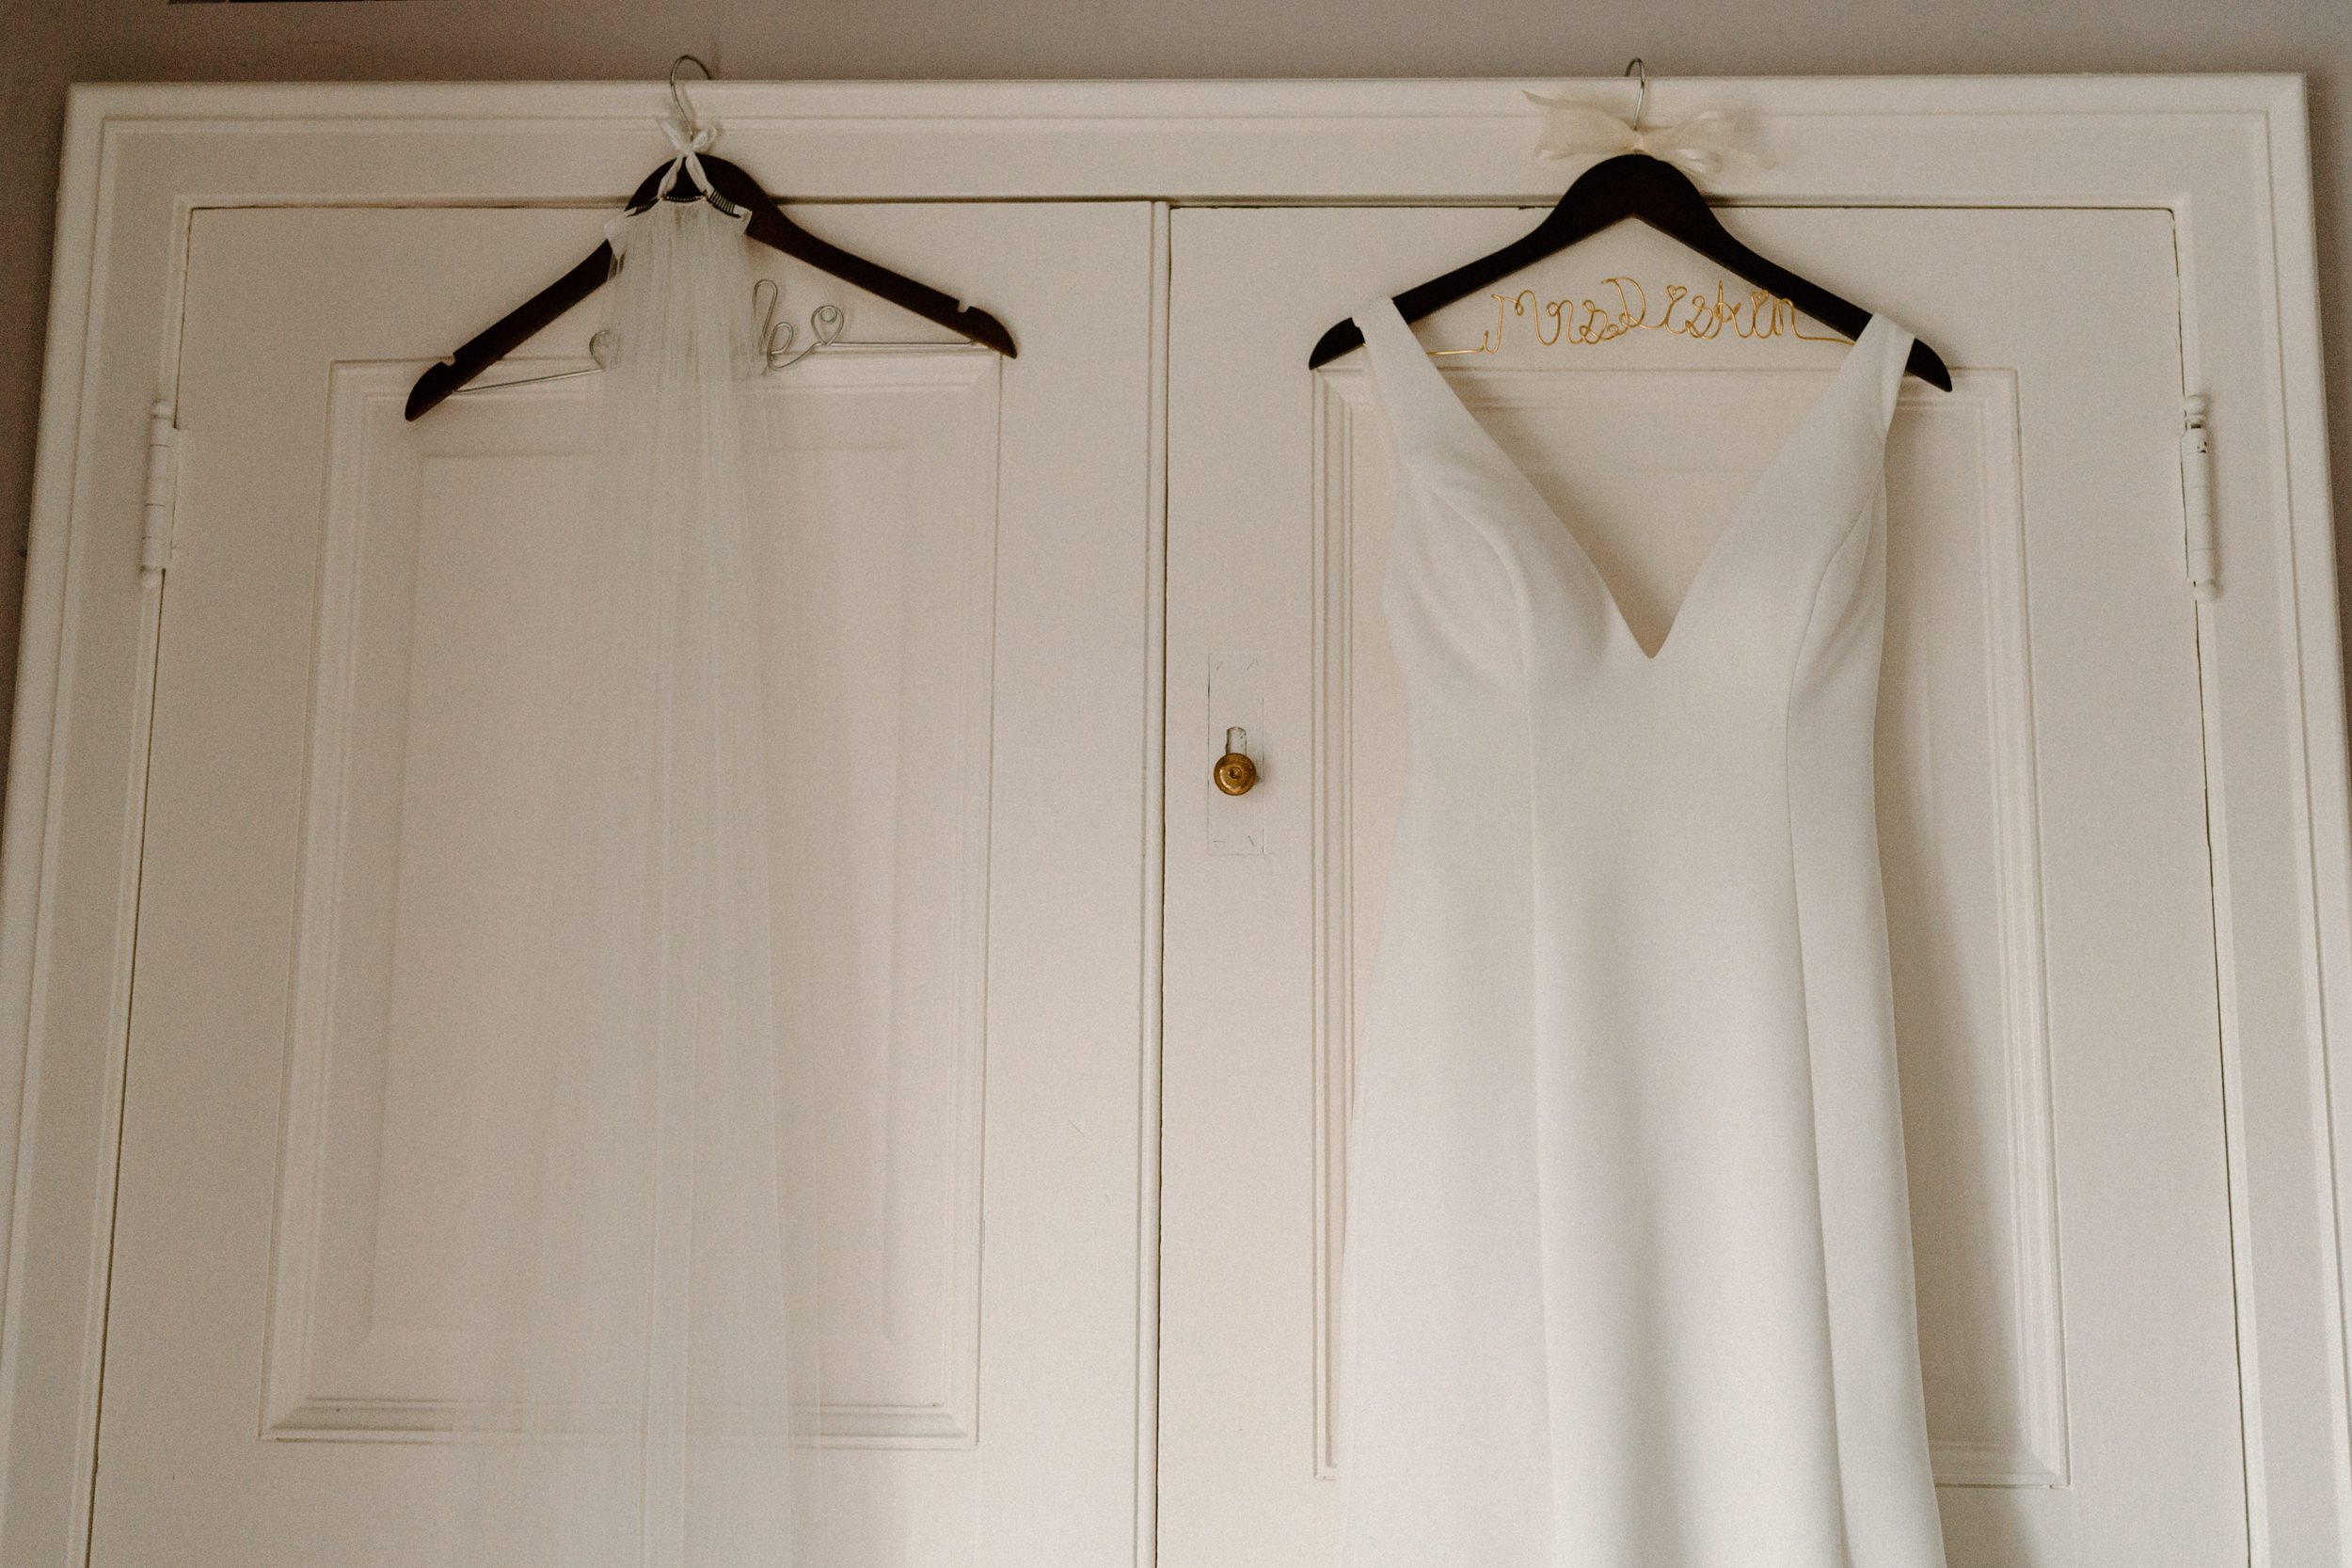 A white wedding dress and veil hang from the closet